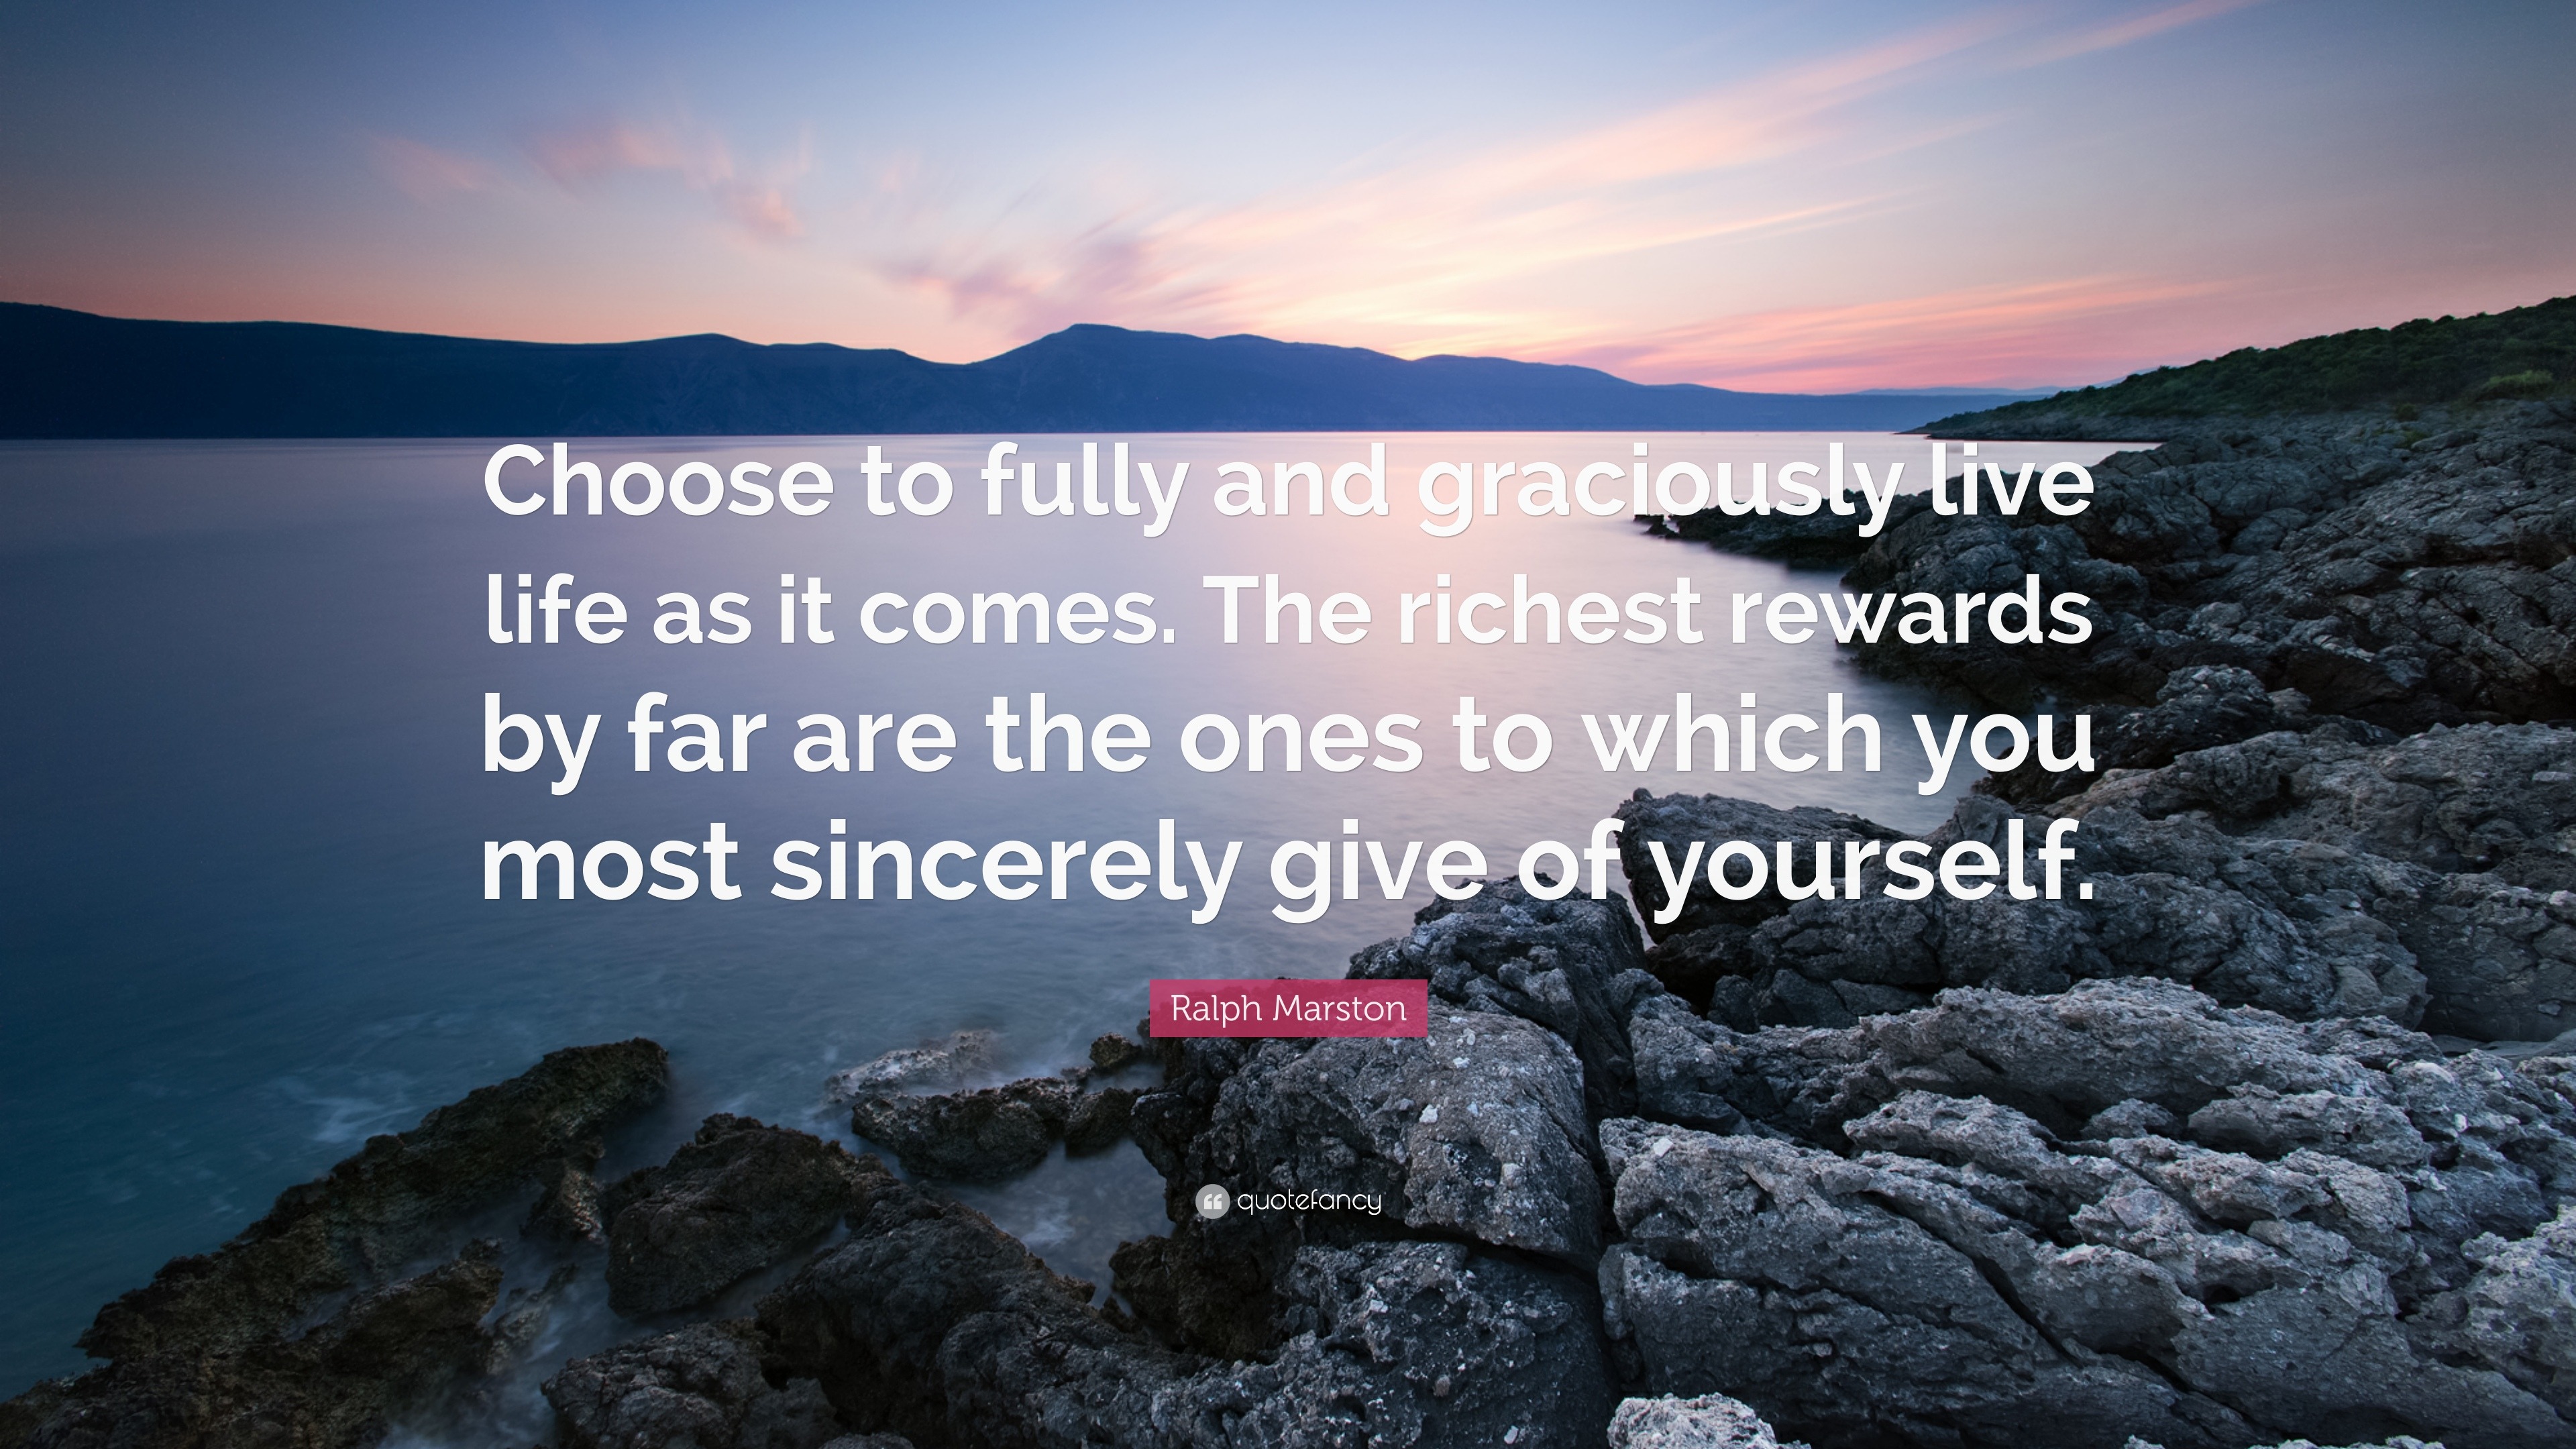 Ralph Marston Quote “Choose to fully and graciously live life as it es